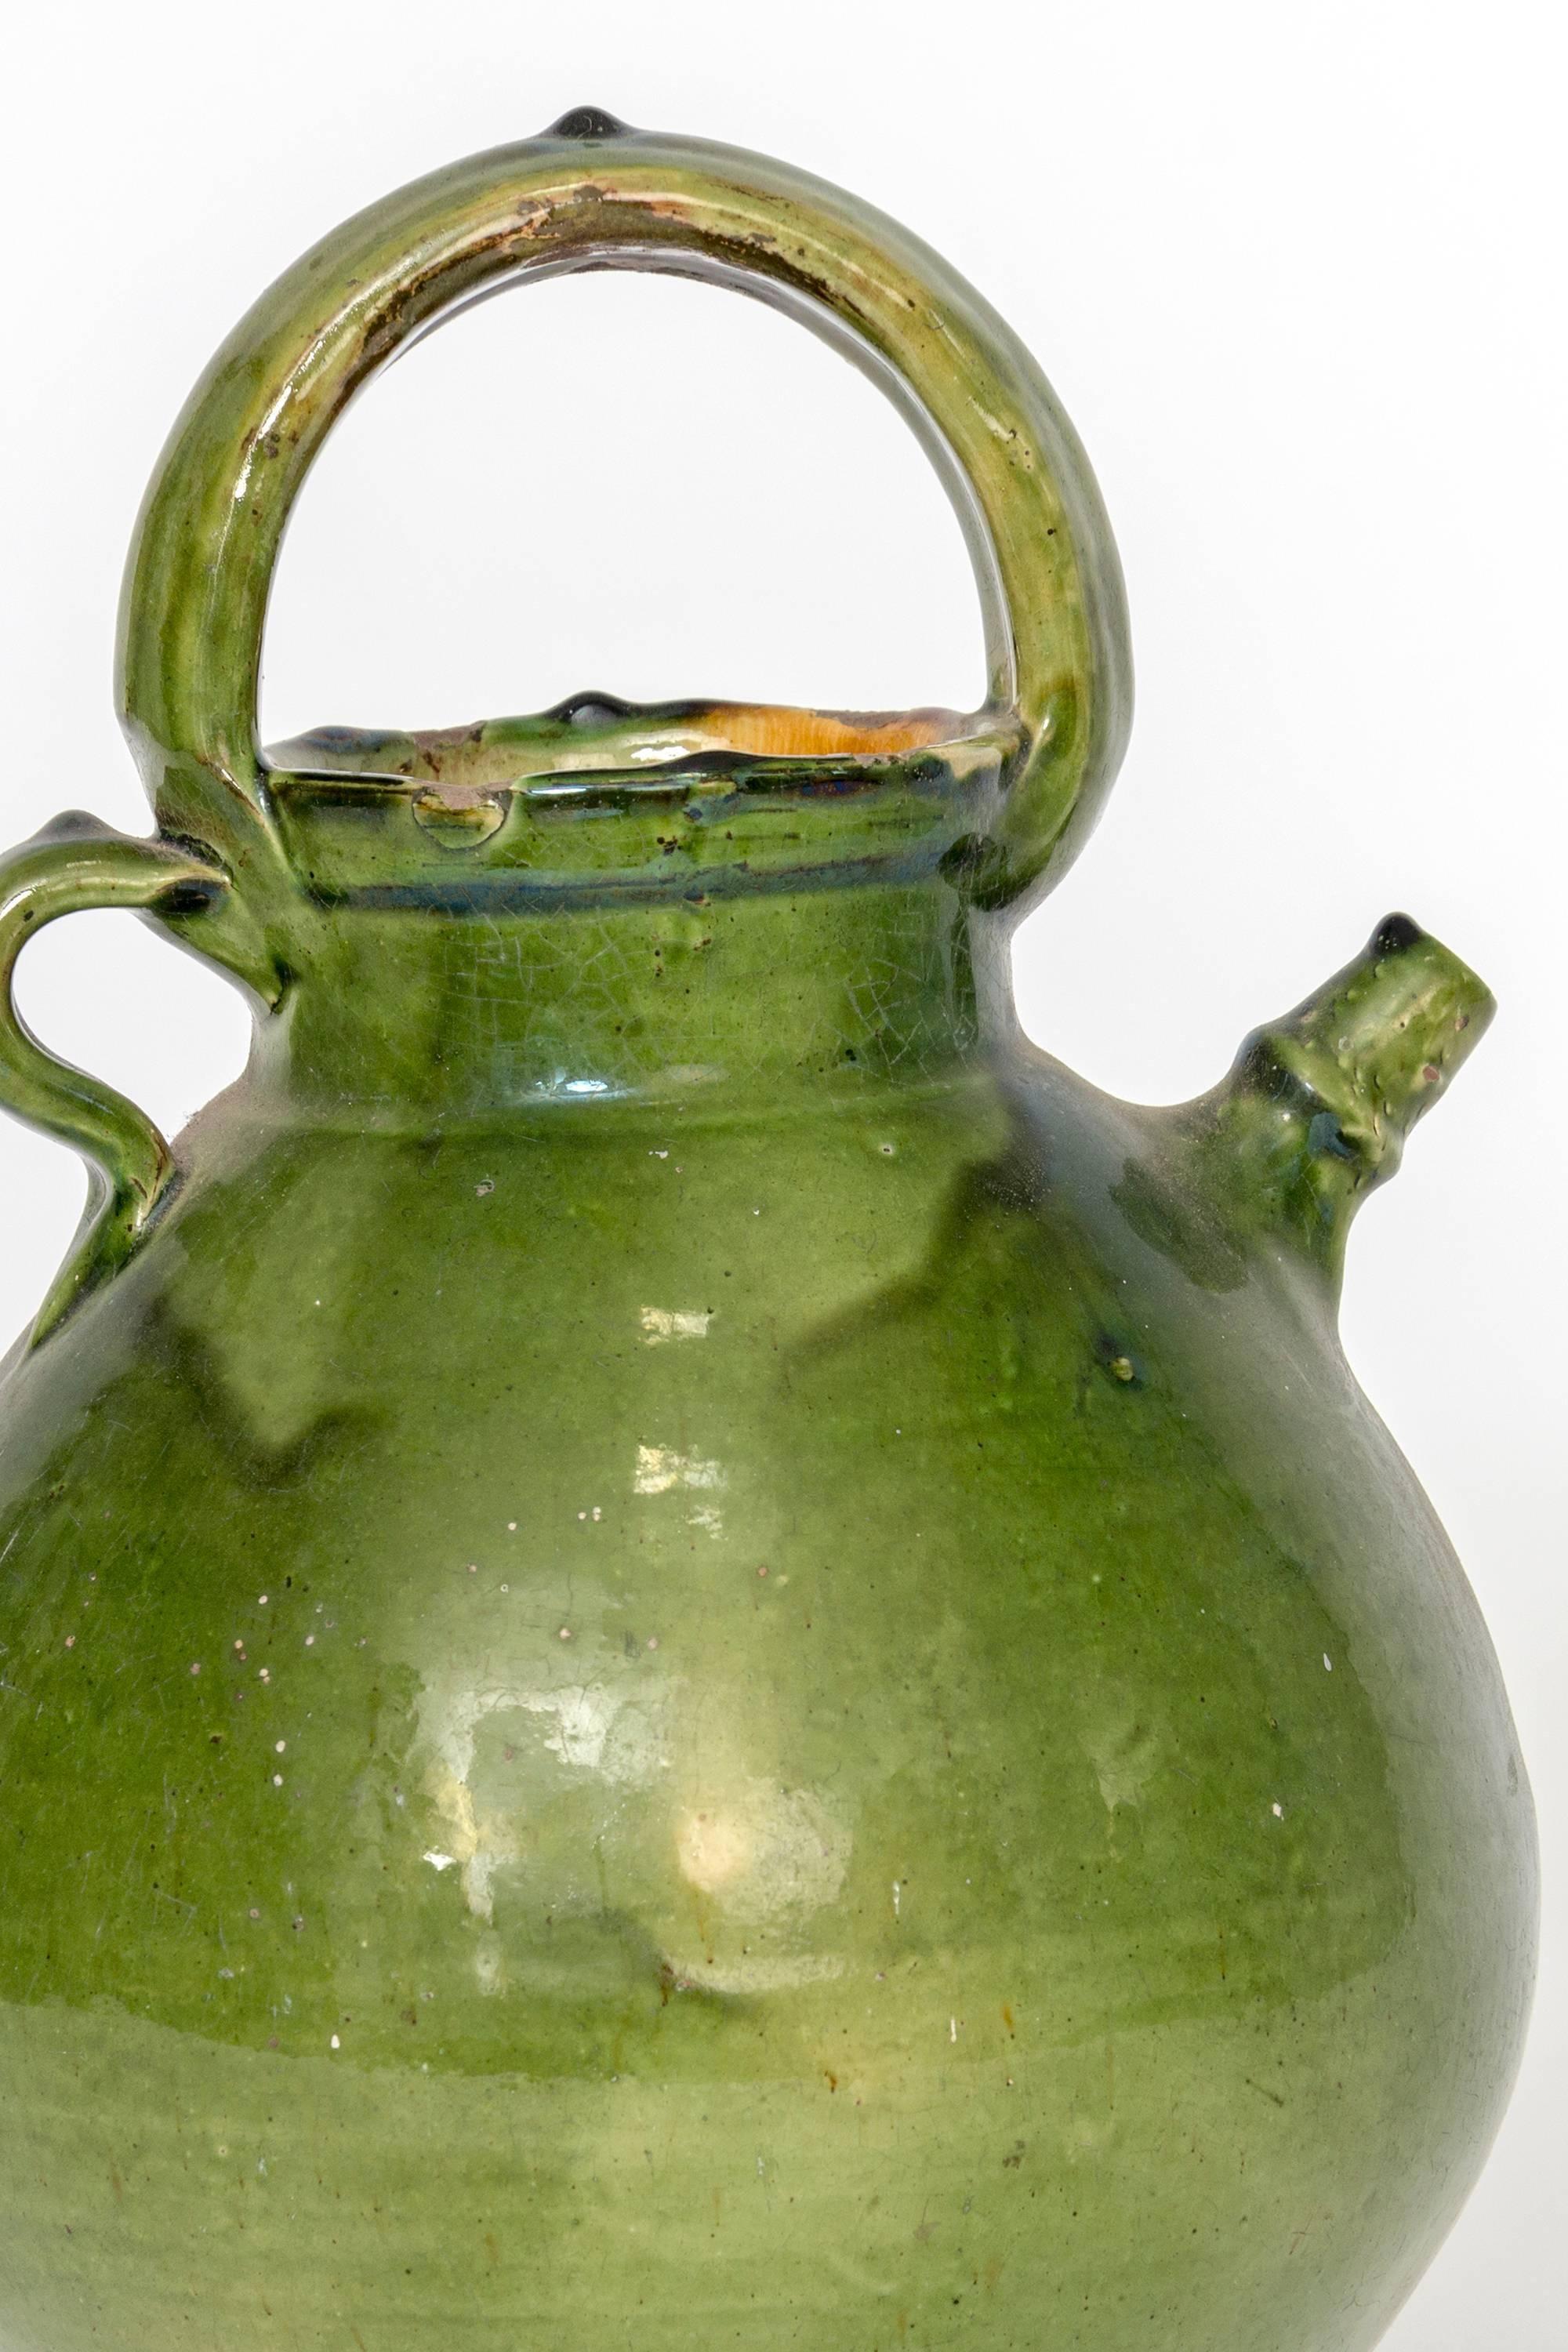 Large Green French pottery jar, probably used for storing olive oil.